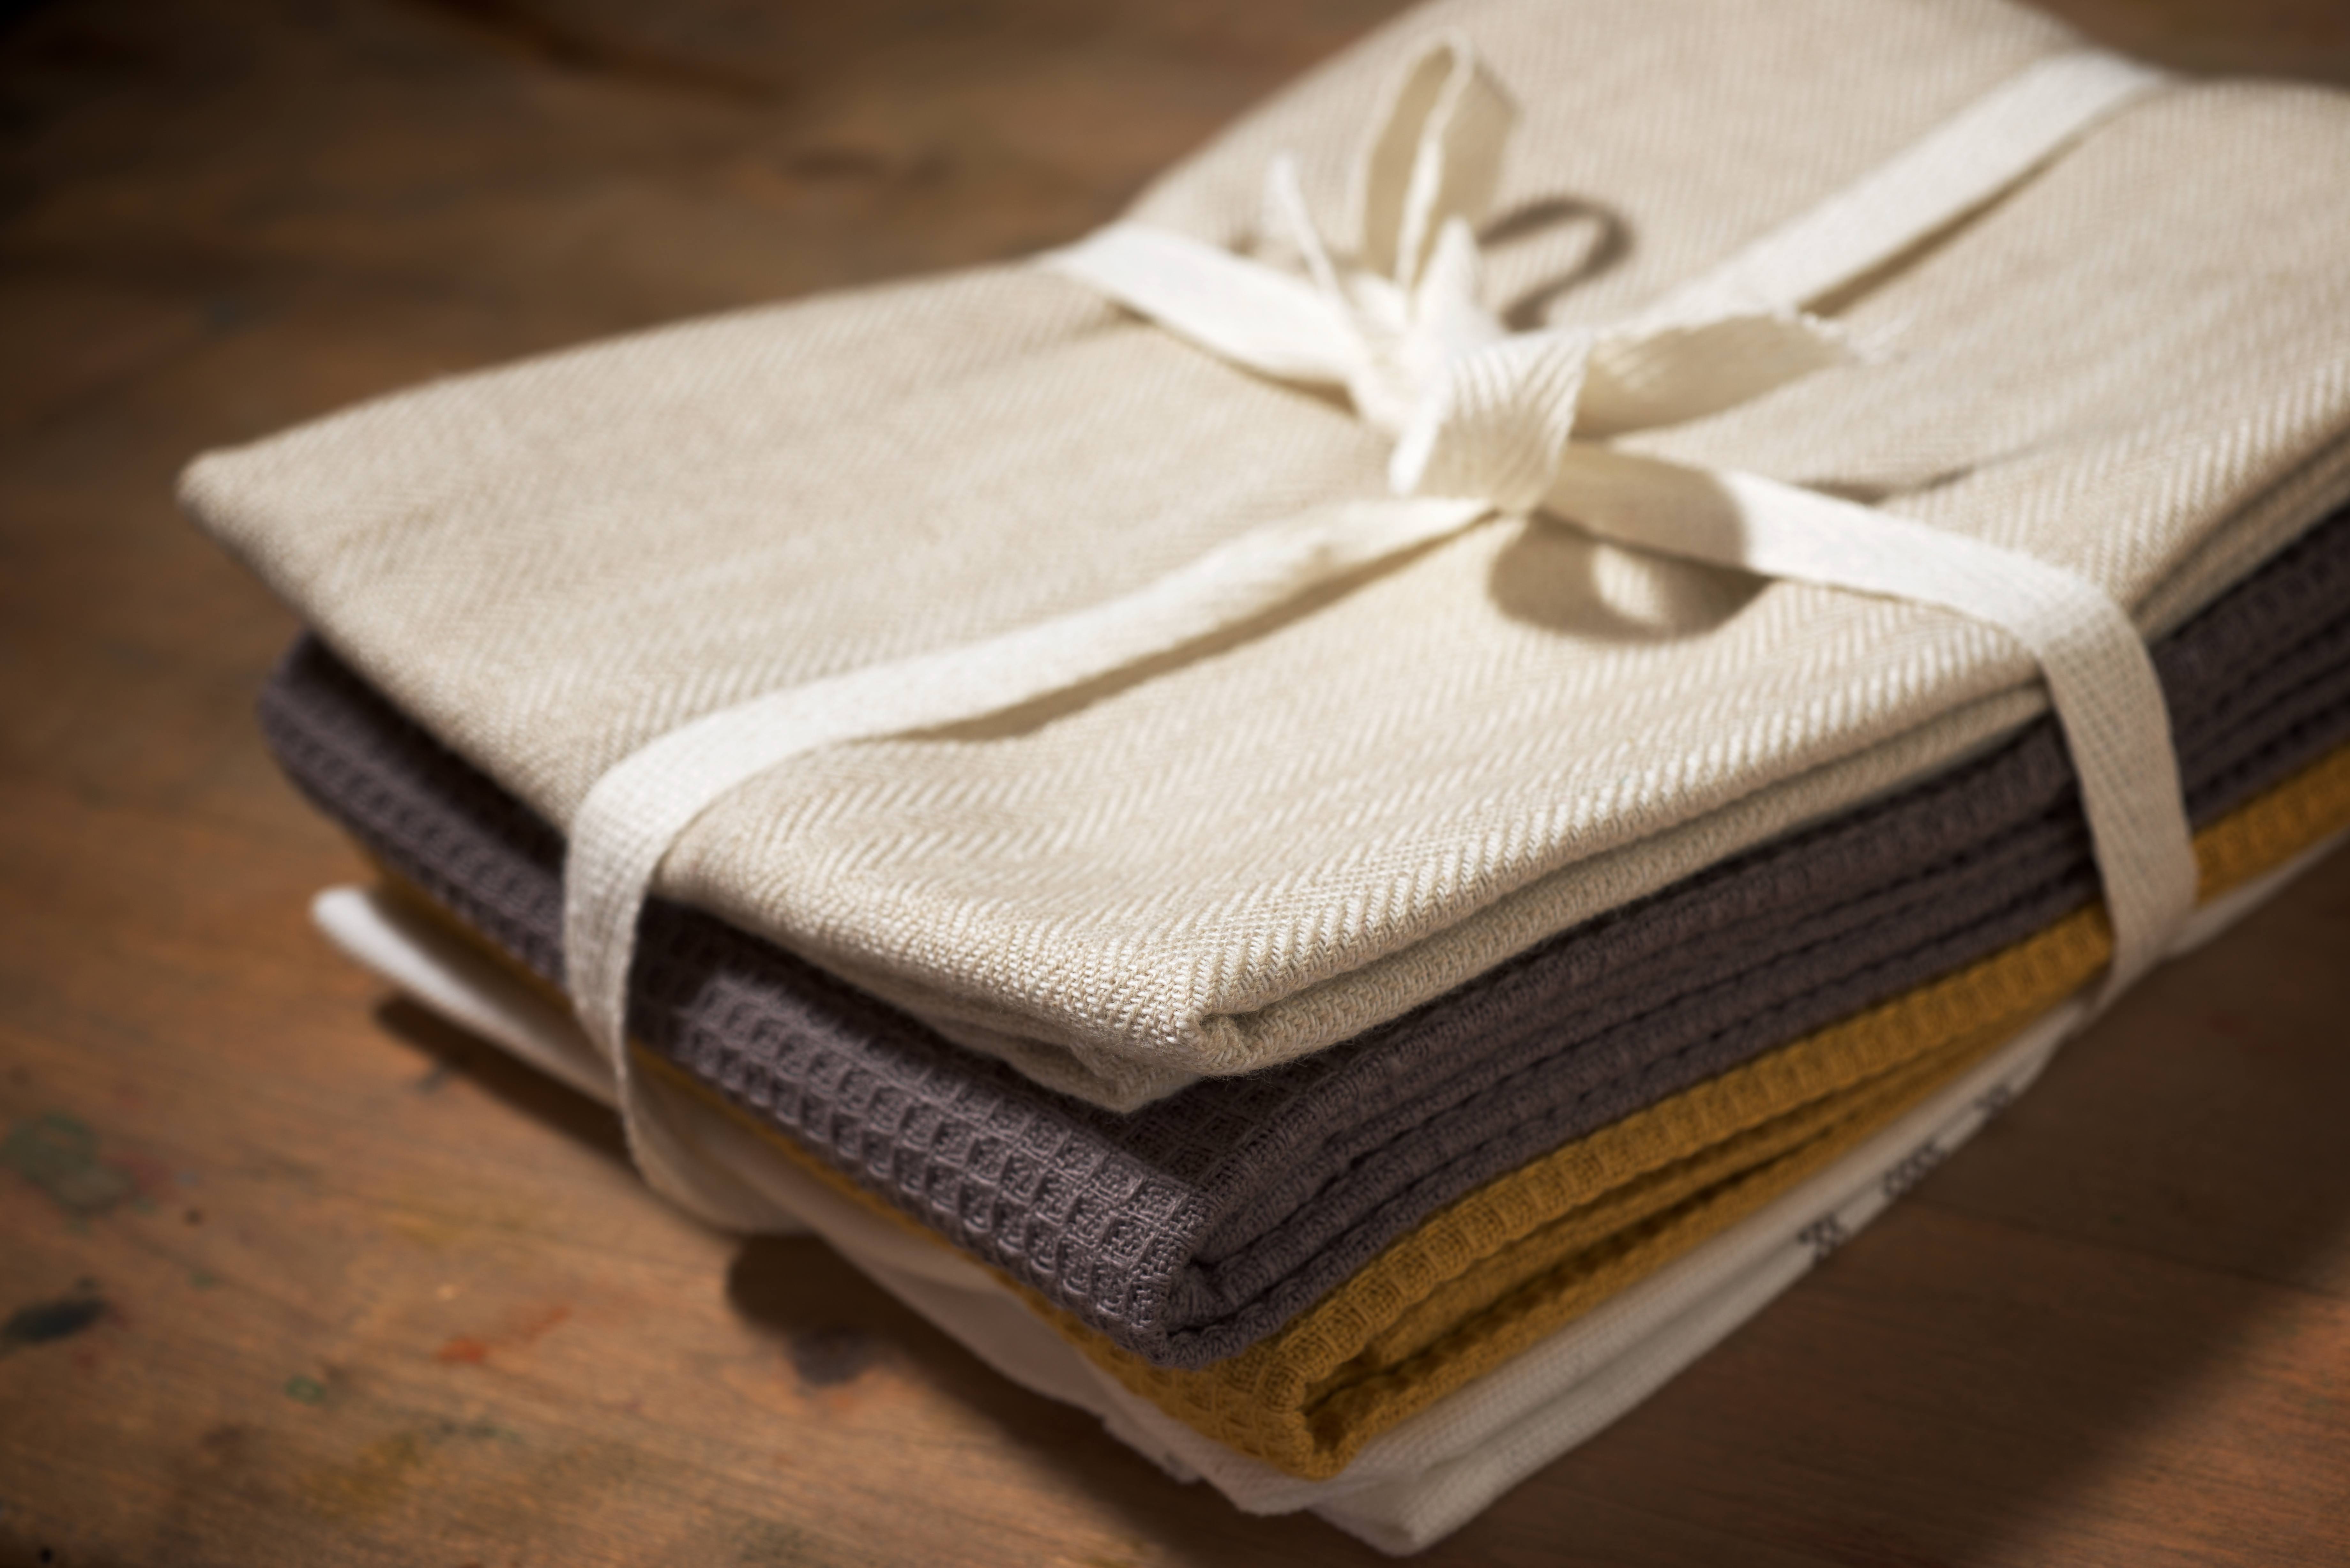 A gift set of stylish dish towels for the kitchen.